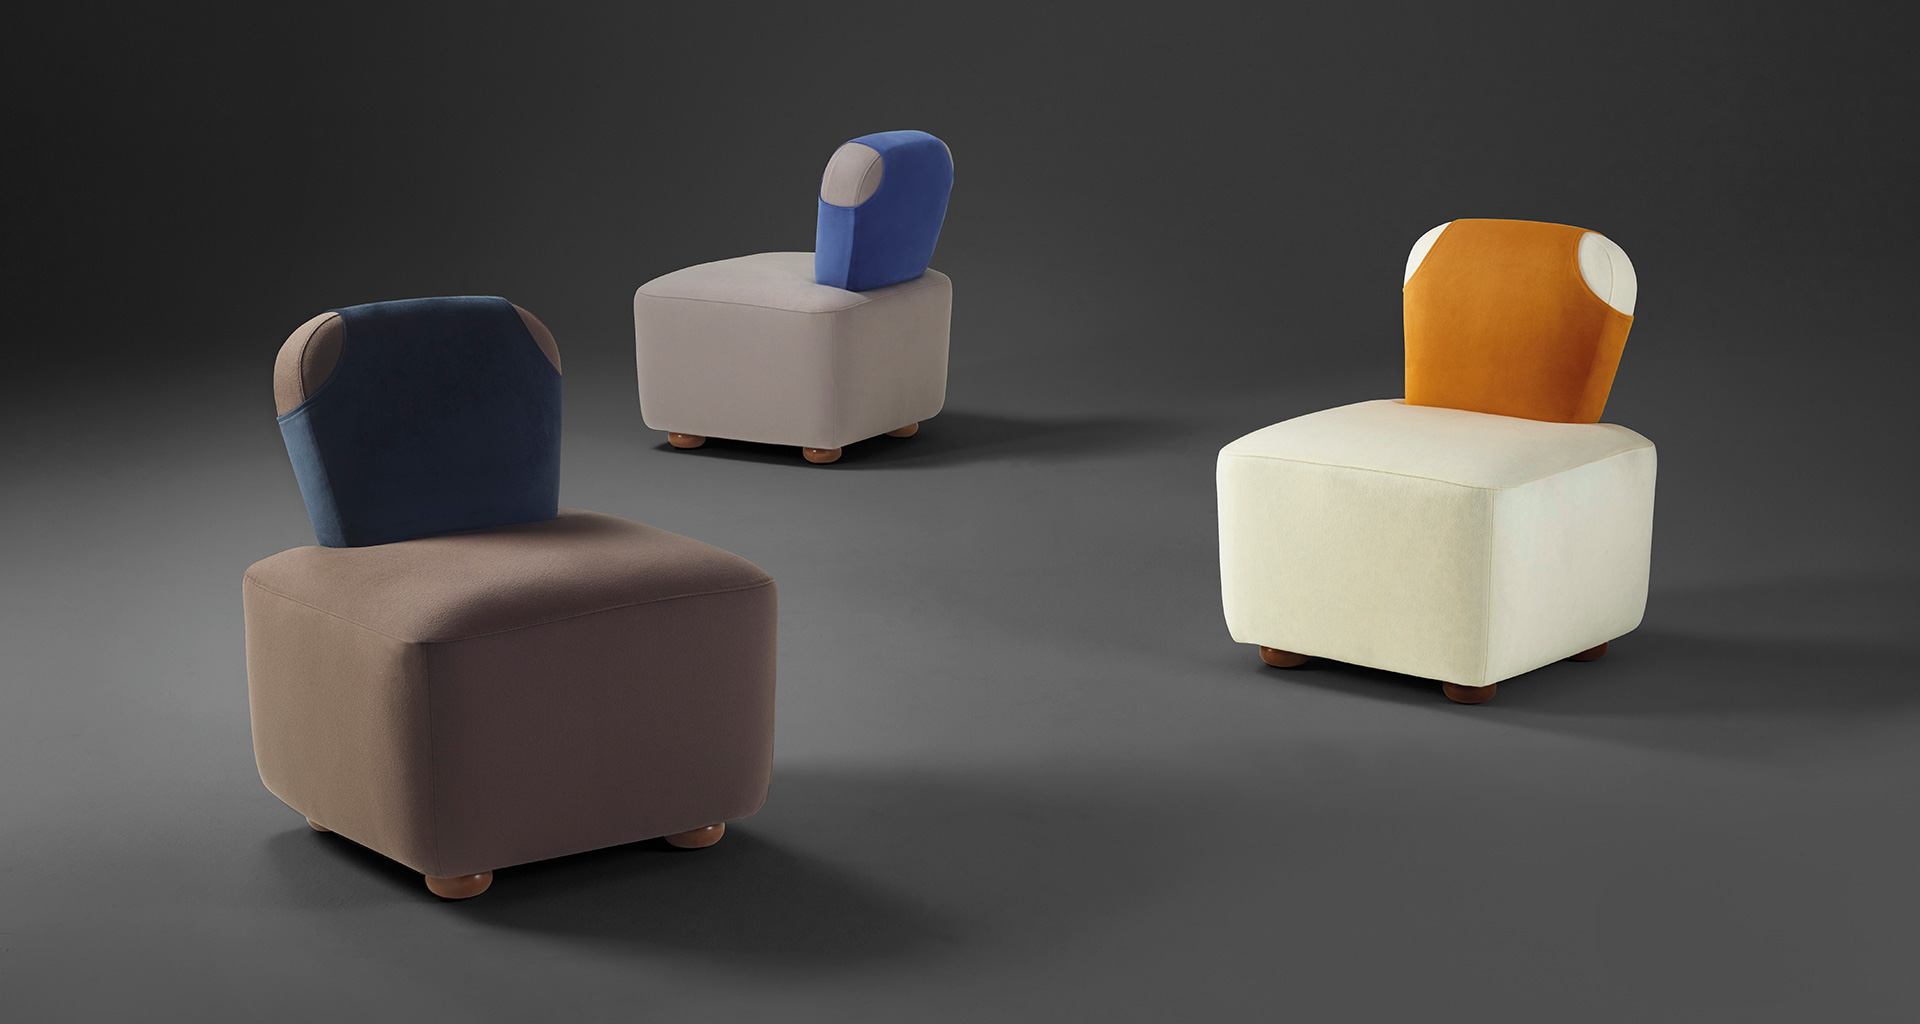 Bomb armchair that belongs to Indigo Tales, the 2018 Promemoria collection led by indigo color and presented during the Milan Design Week | Promemoria